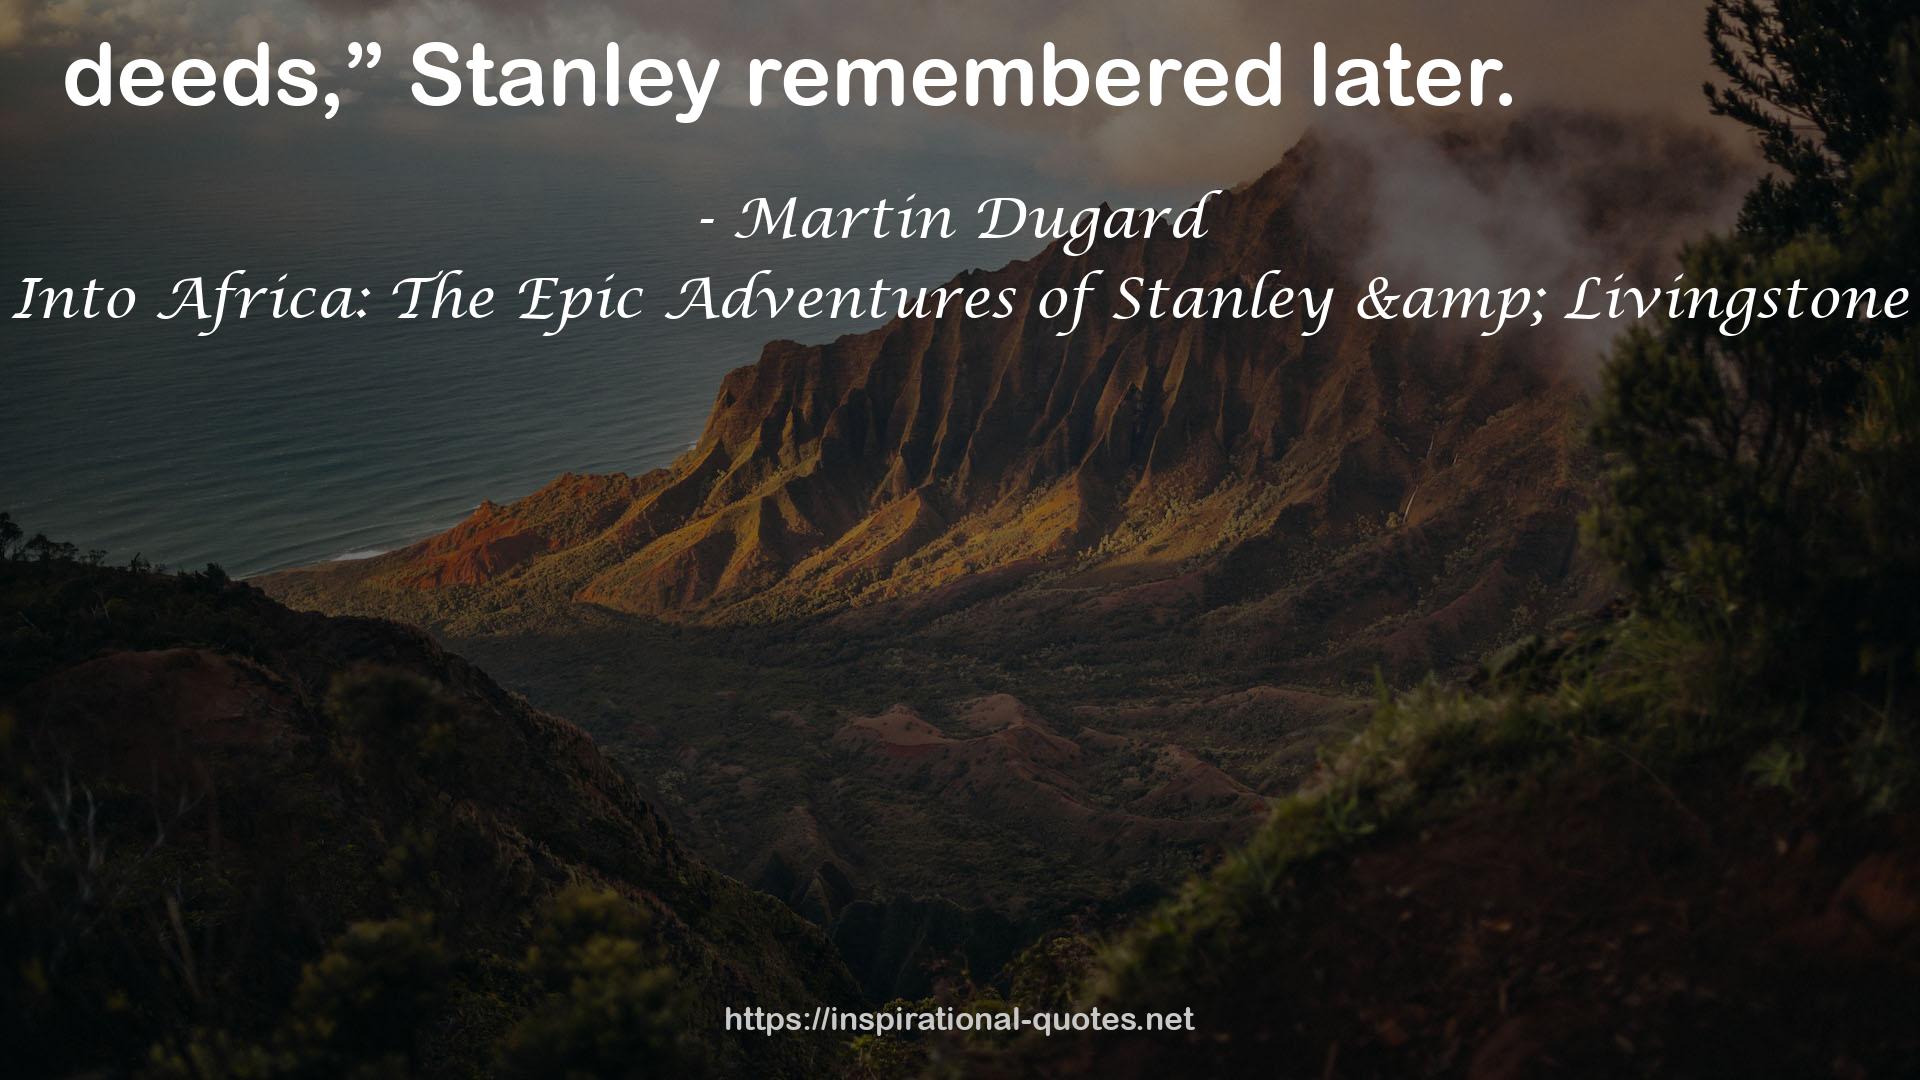 Into Africa: The Epic Adventures of Stanley & Livingstone QUOTES